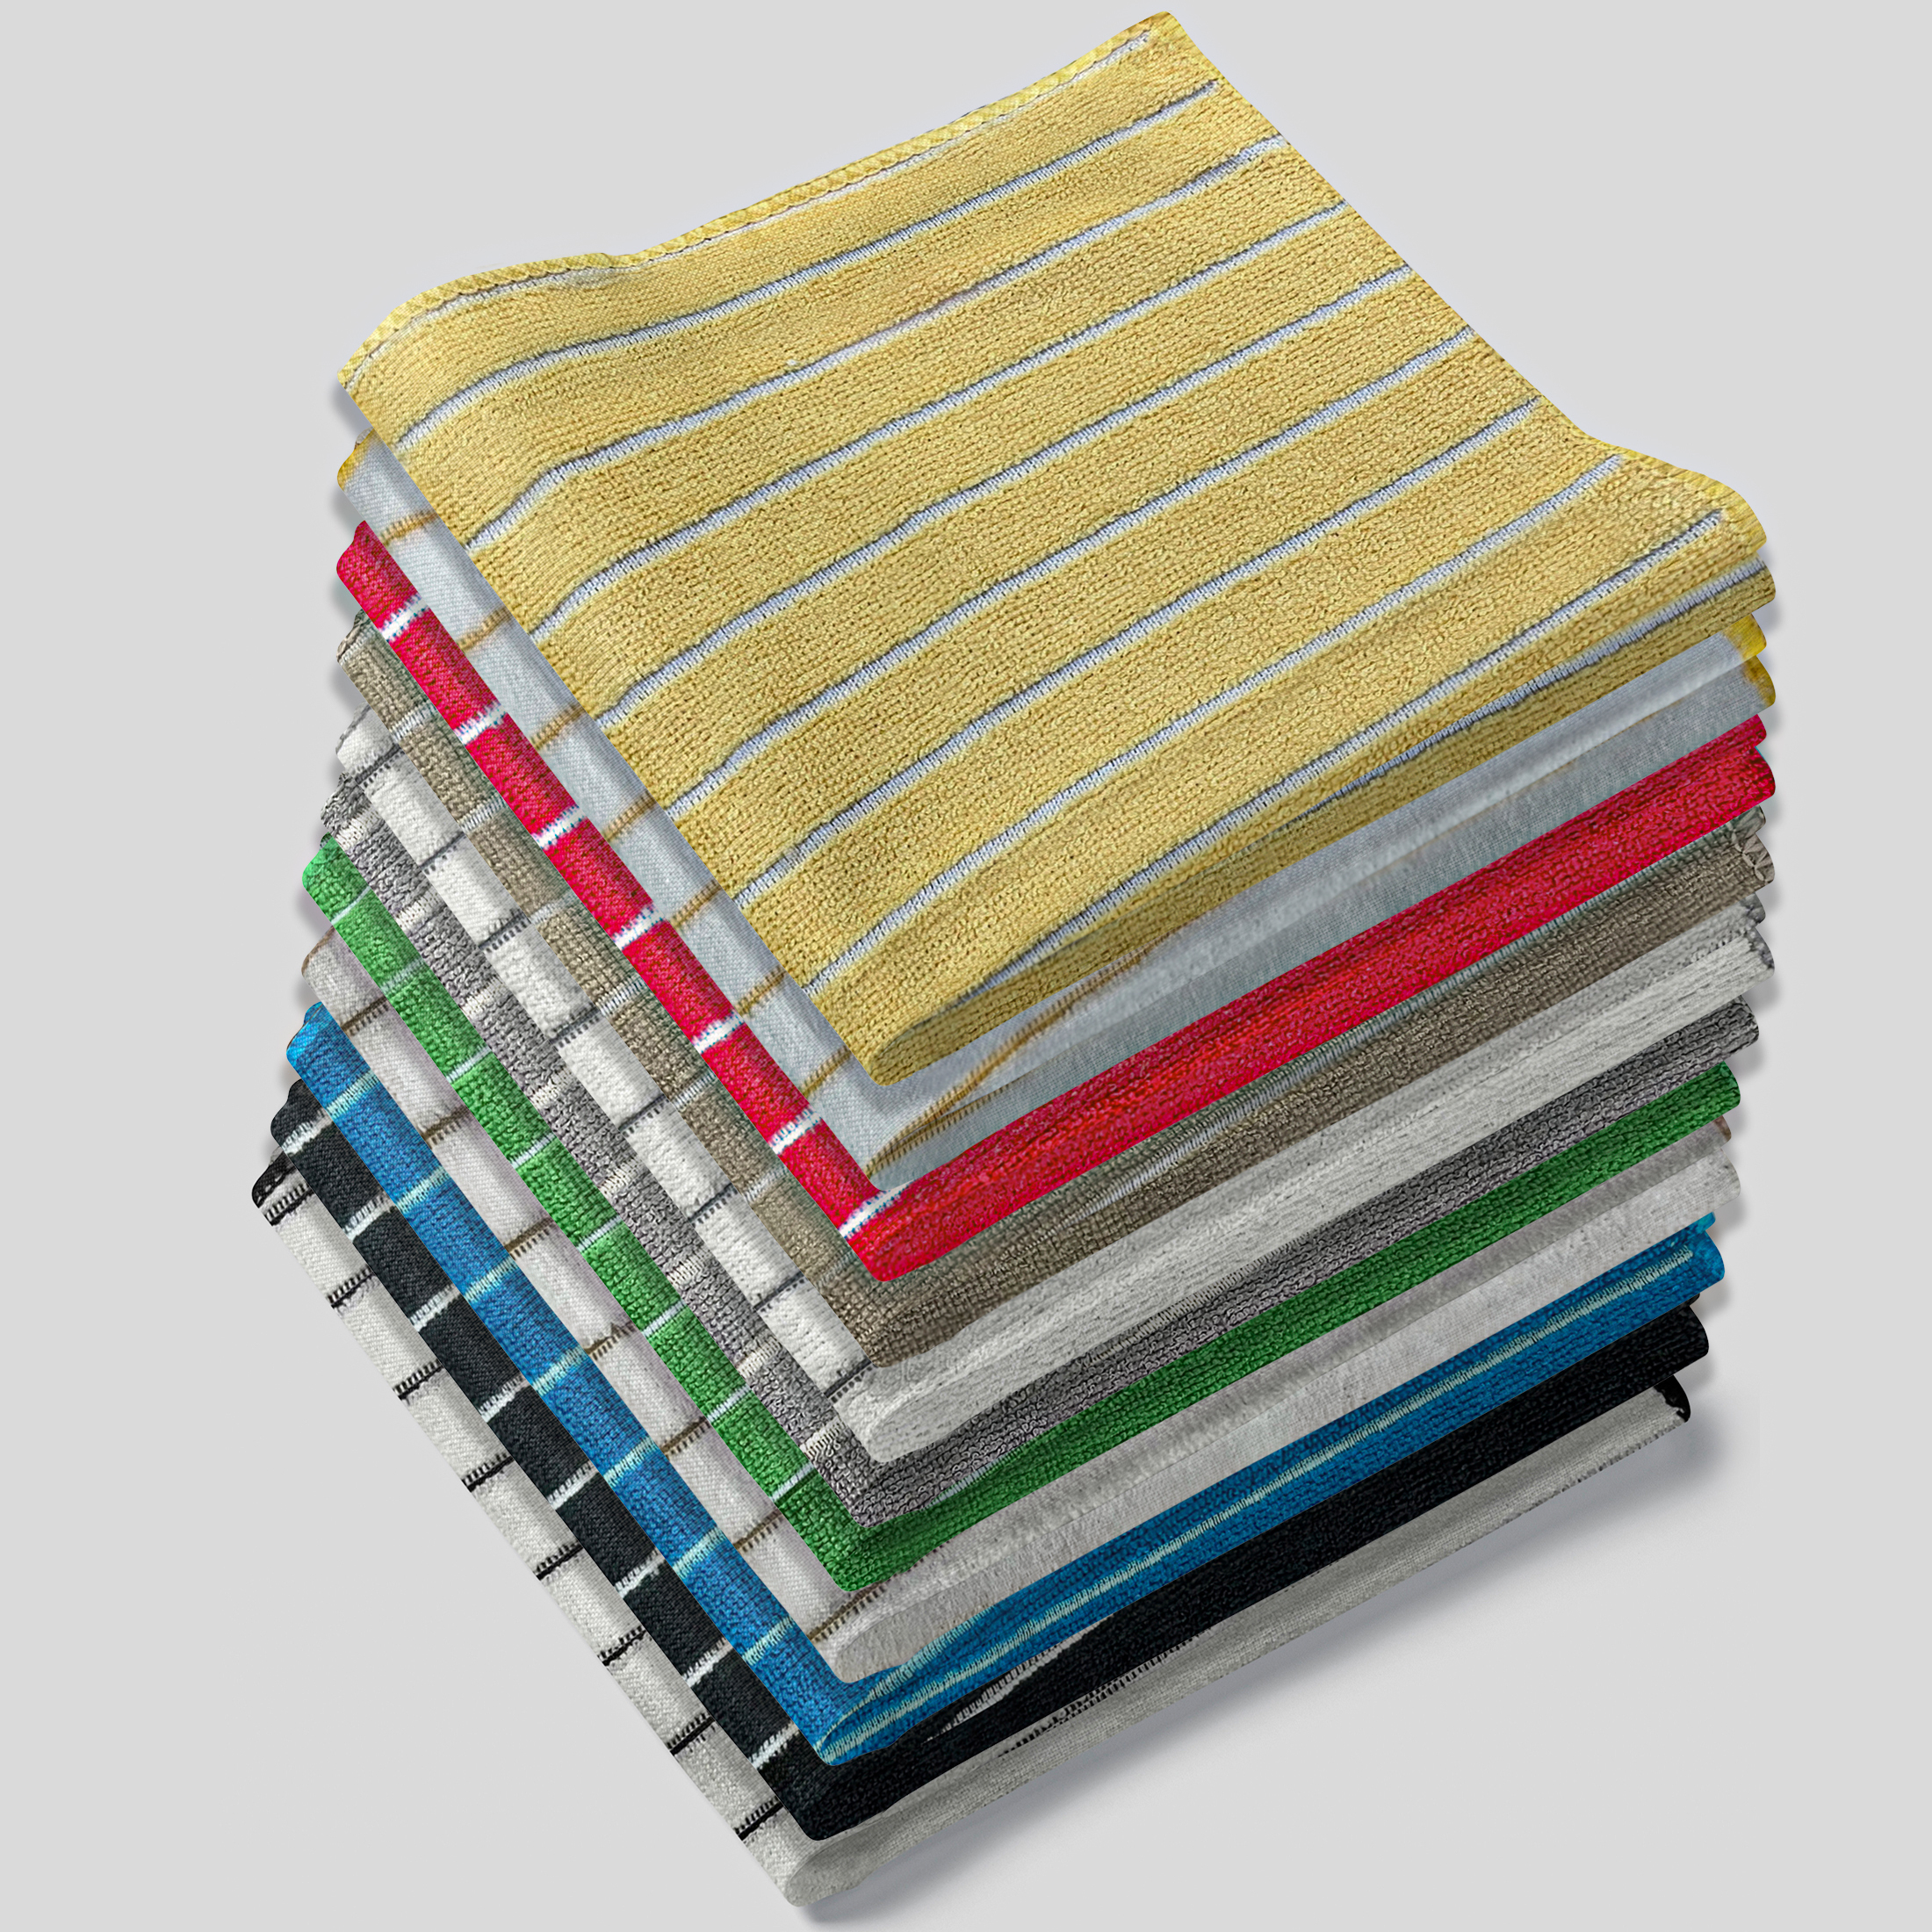 12-Pack Absorbent And Super Soft Microfiber Dish Cloths - Waffle & Striped